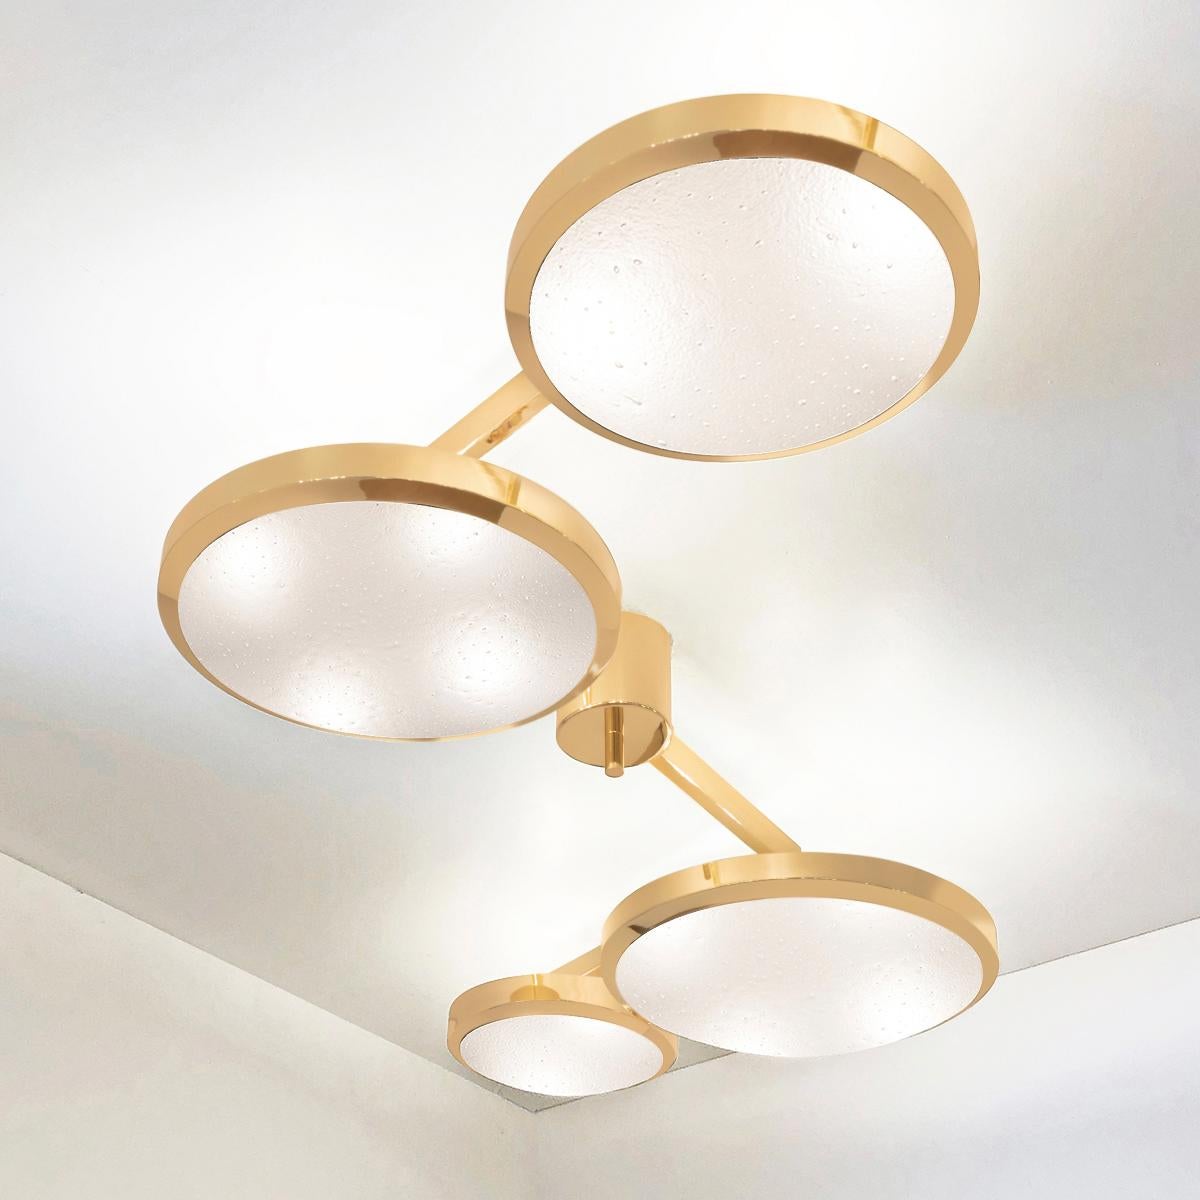 The Quattro ceiling light plays with the notion of lines and shapes, bringing the concept to life with its distinctive winding frame with four variable size shades at staggered heights. The first images show the fixture in our polished brass